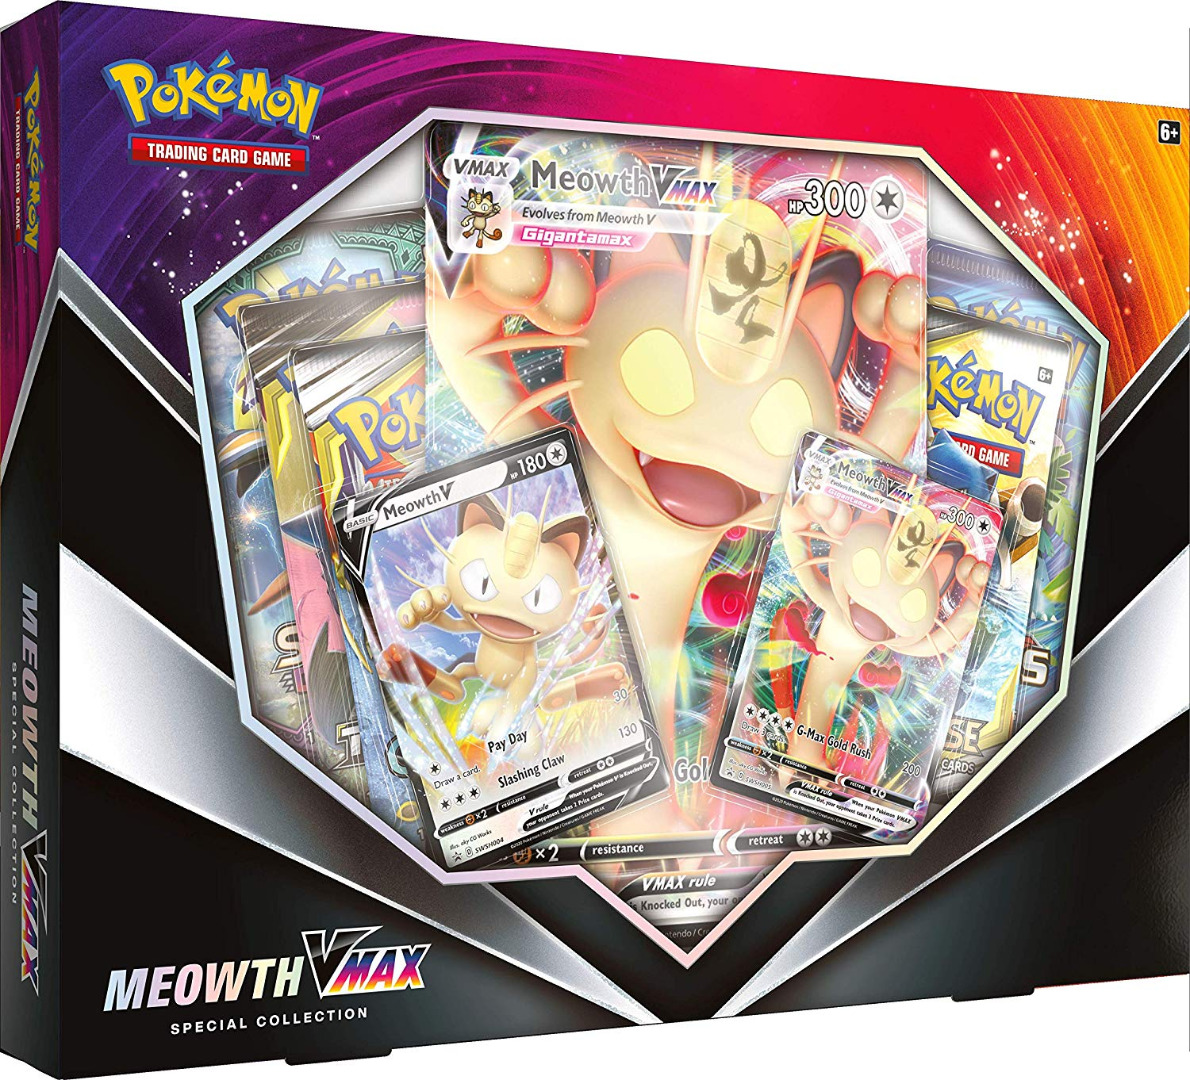 Pokemon Meowth Vmax Special Collection Box January English